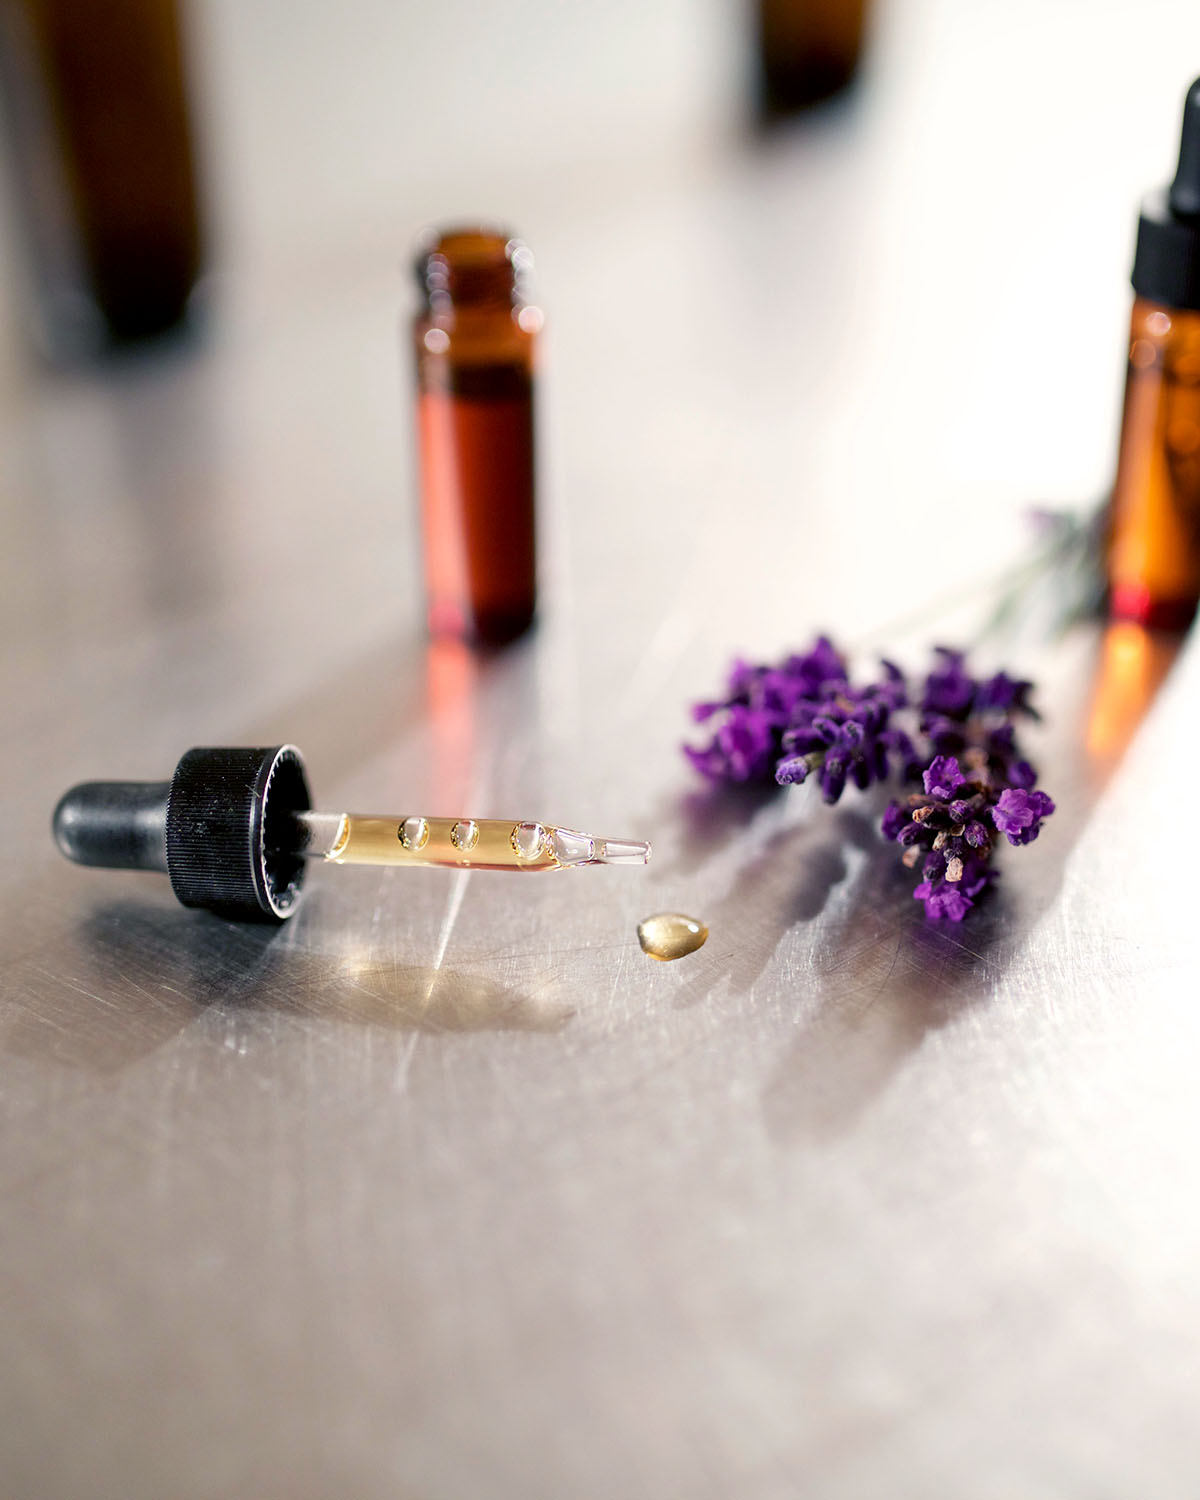 How To Choose the Right Lavender Essential Oil | Herbal Academy | Lavender essential oil is one of the most popular oils out there. But how do you choose the right one? Let us help you make that choice with confidence!